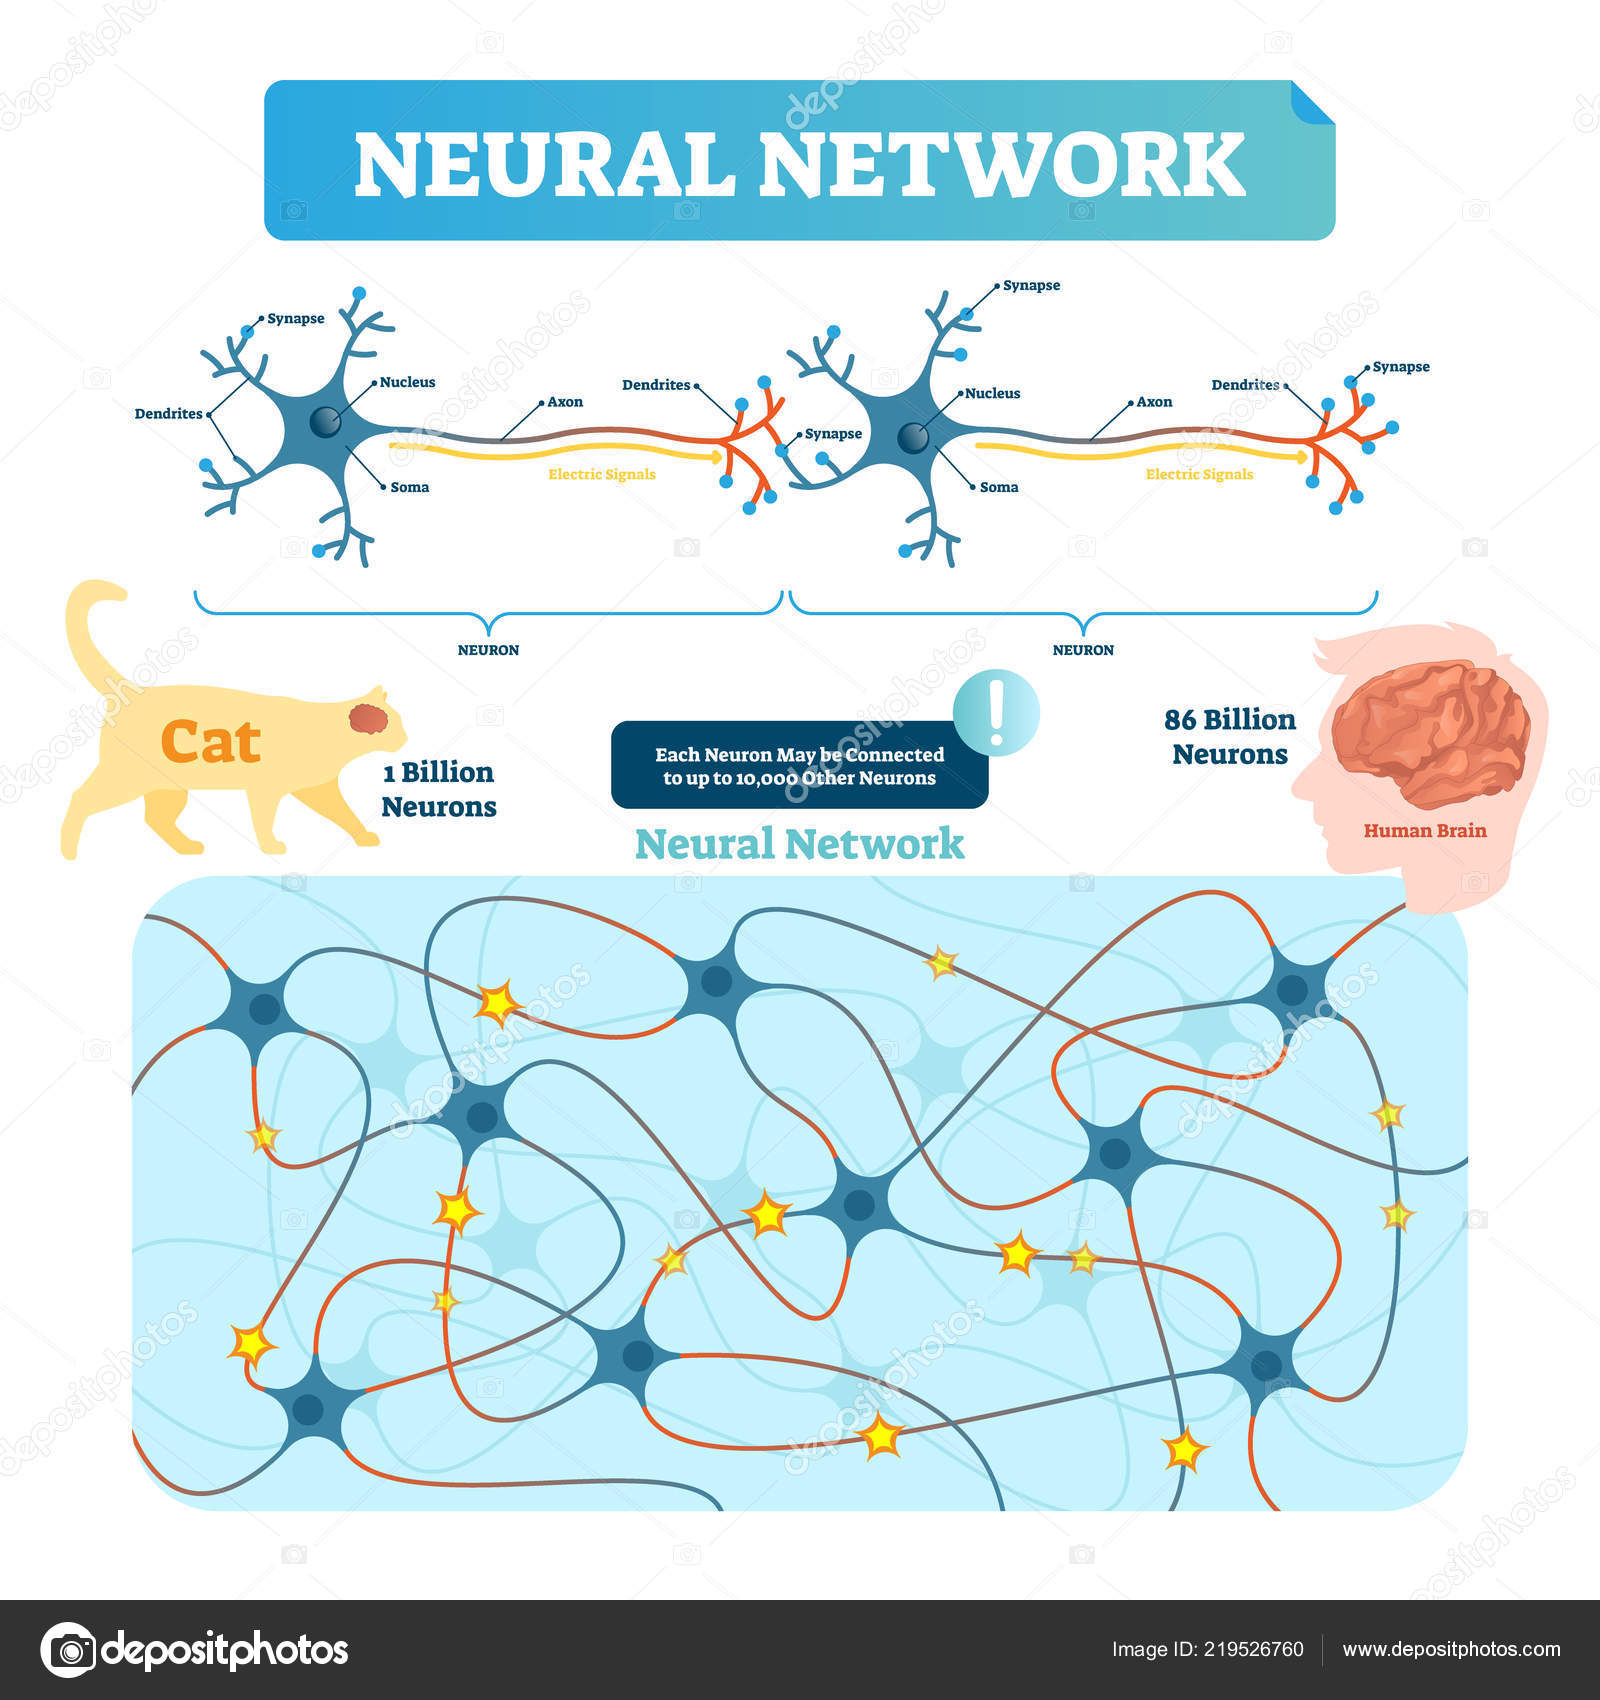 Diagram Of A Neuron Neural Network Vector Illustration Neuron Structure And Net Diagram